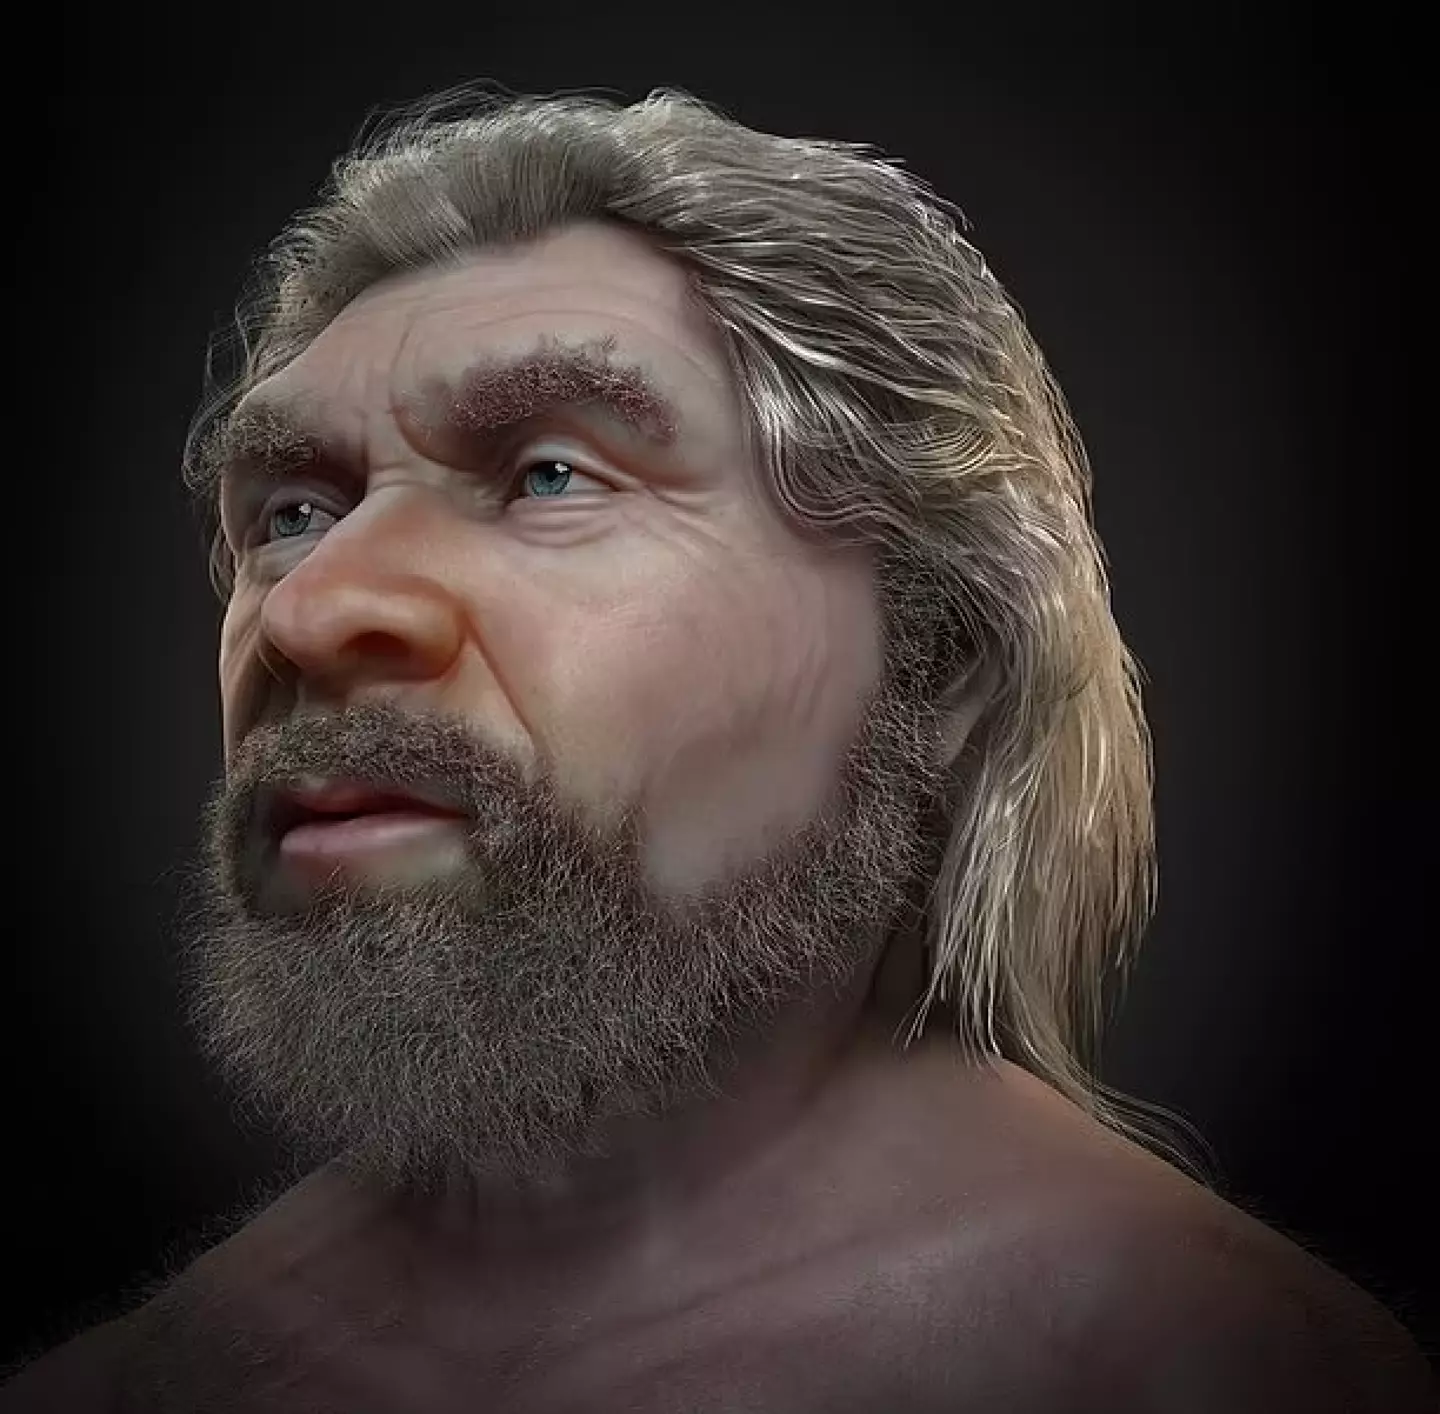 CT scans gave us an eerie look into what the ancient man may have looked like.